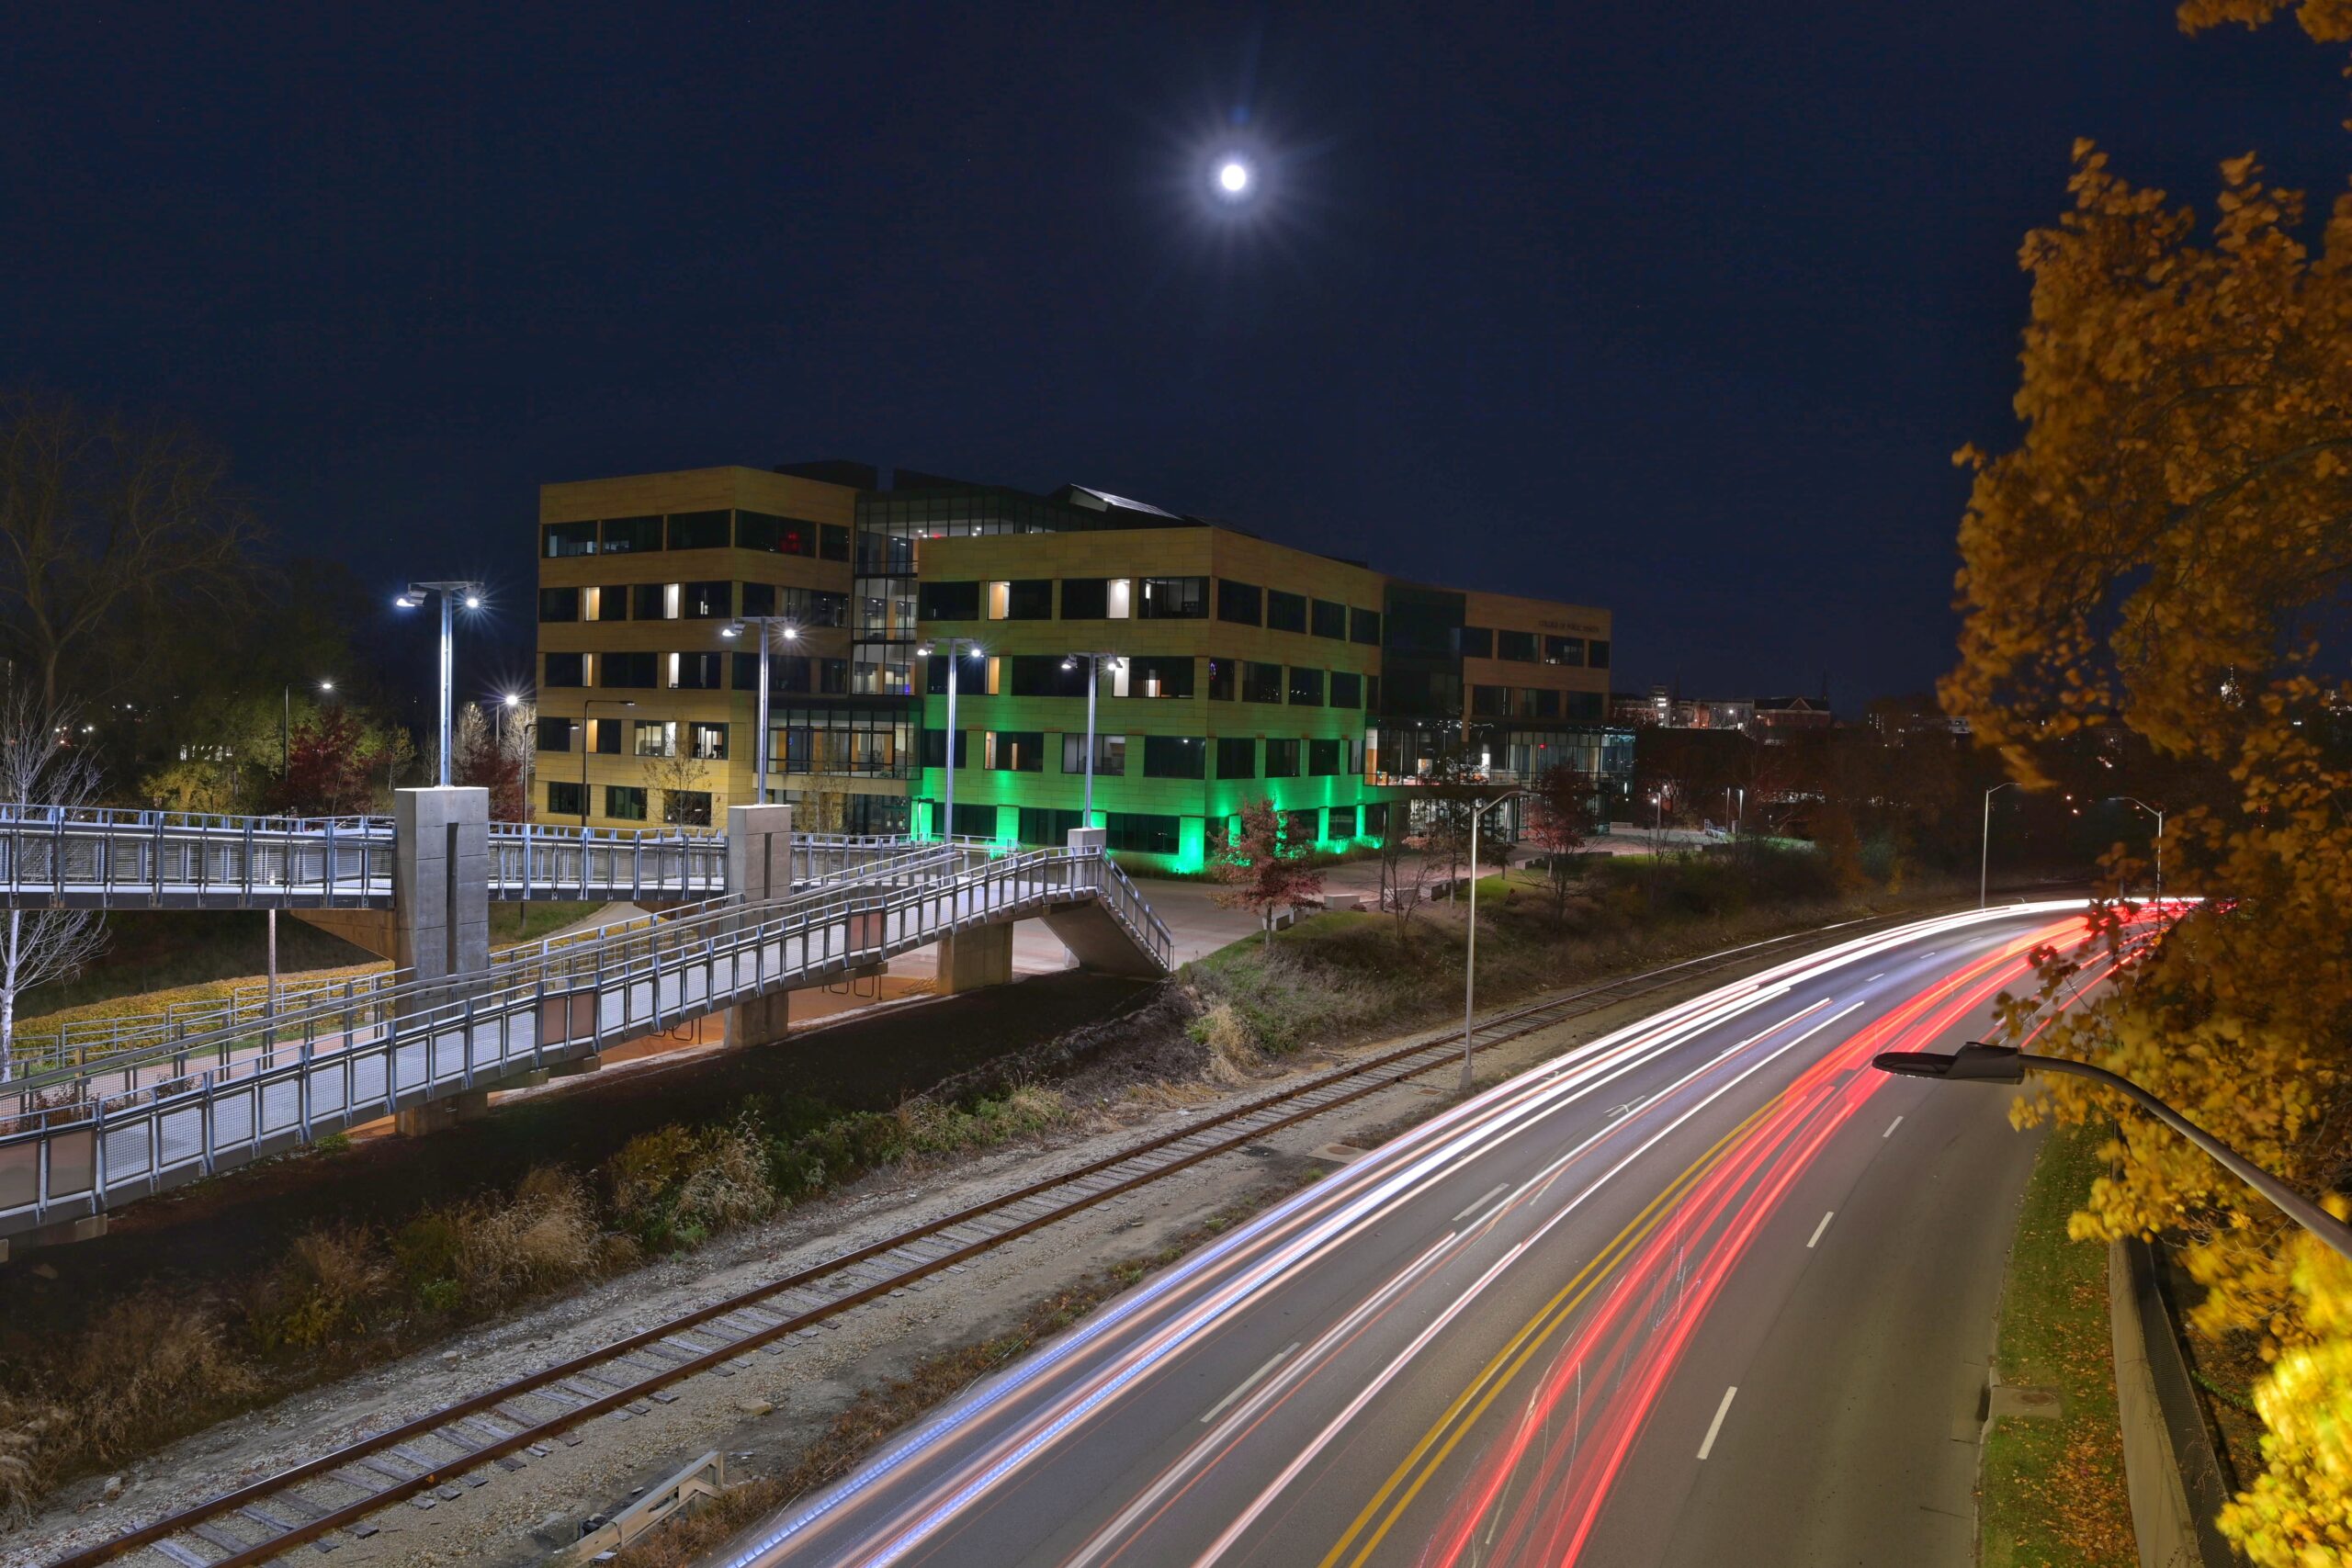 The UI COllege of Public Health building lighting green at night with view of road